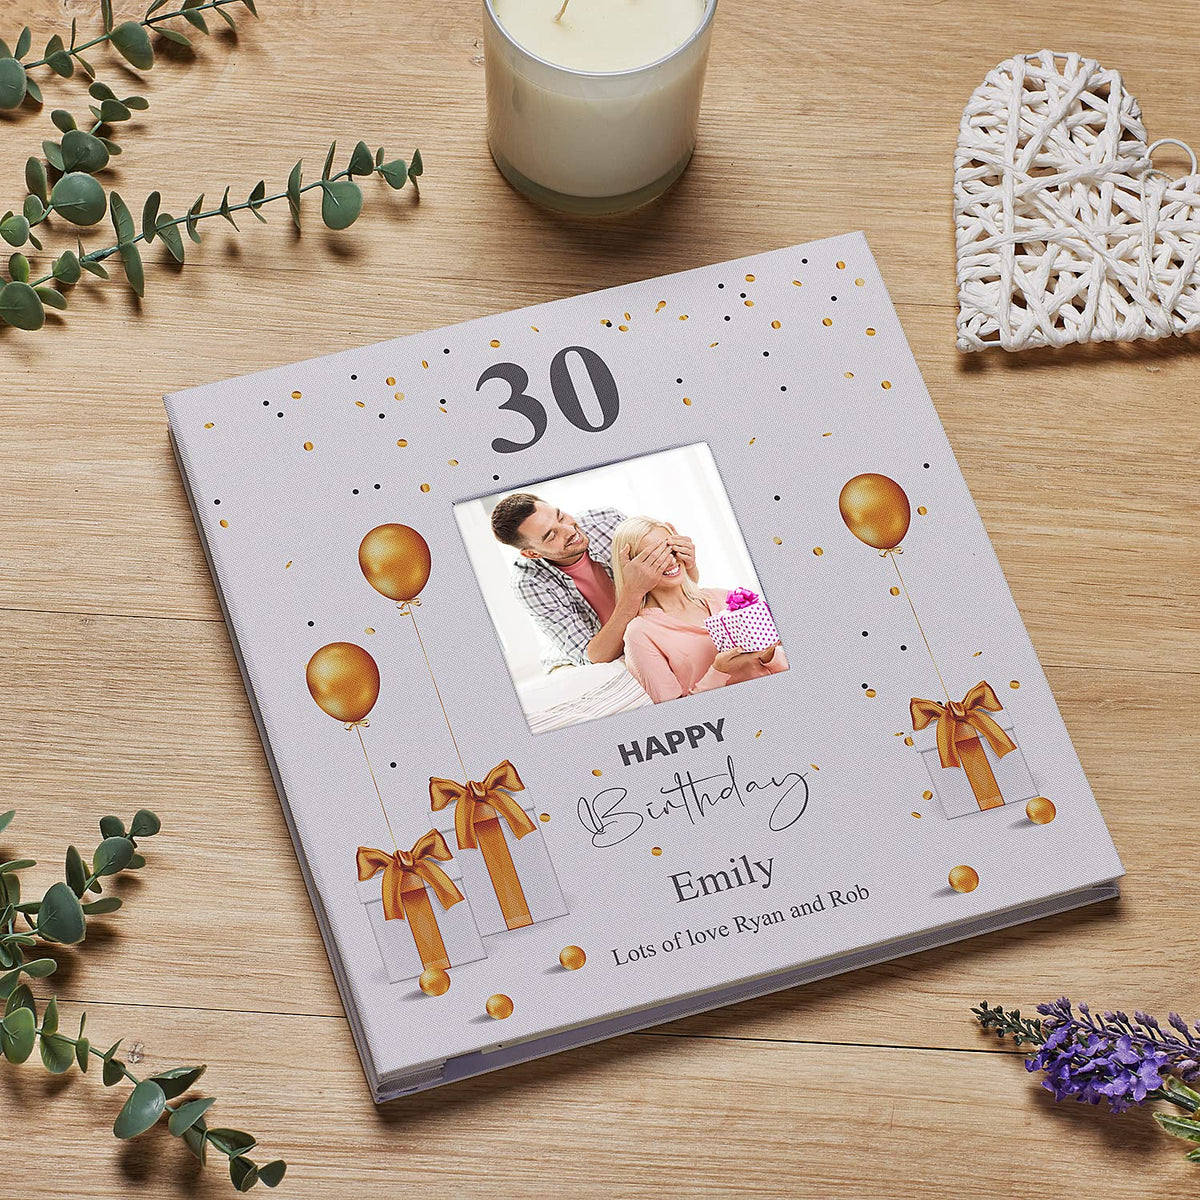 Personalised 30th Birthday Photo Album Linen Cover With Gold Balloons